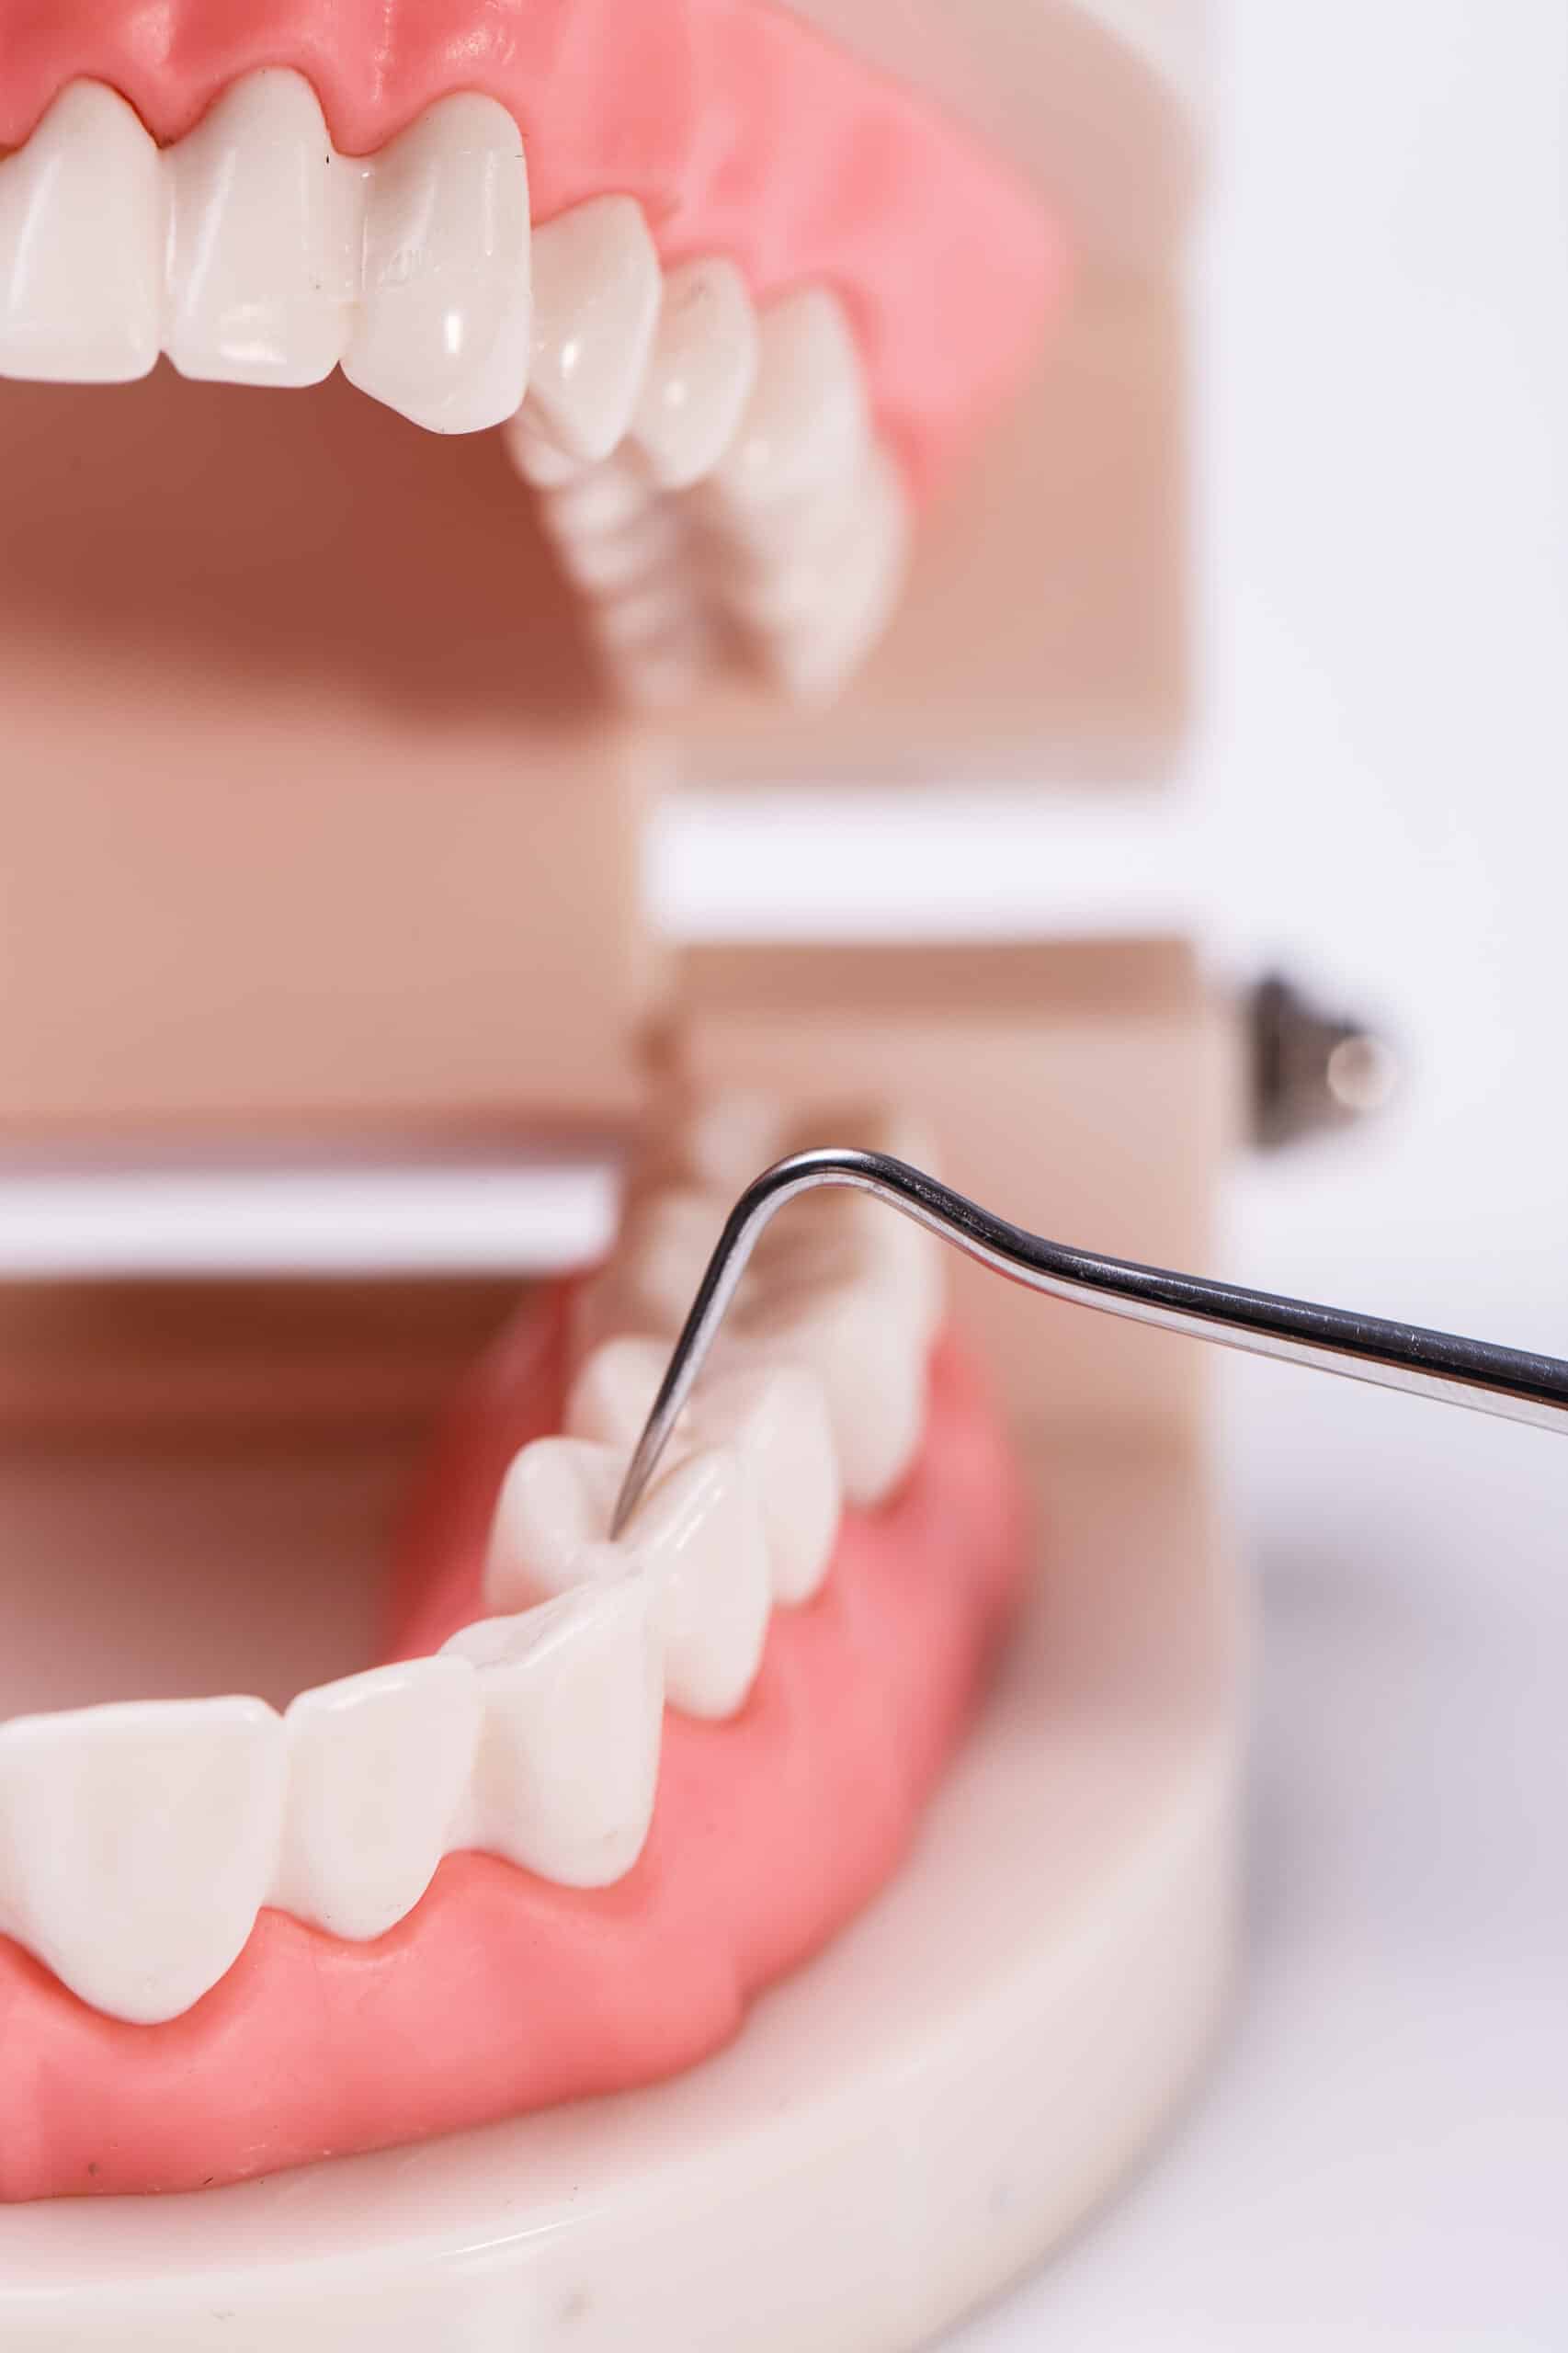 Protect your oral health with our advanced gum disease treatments, designed to treat and manage periodontal issues.